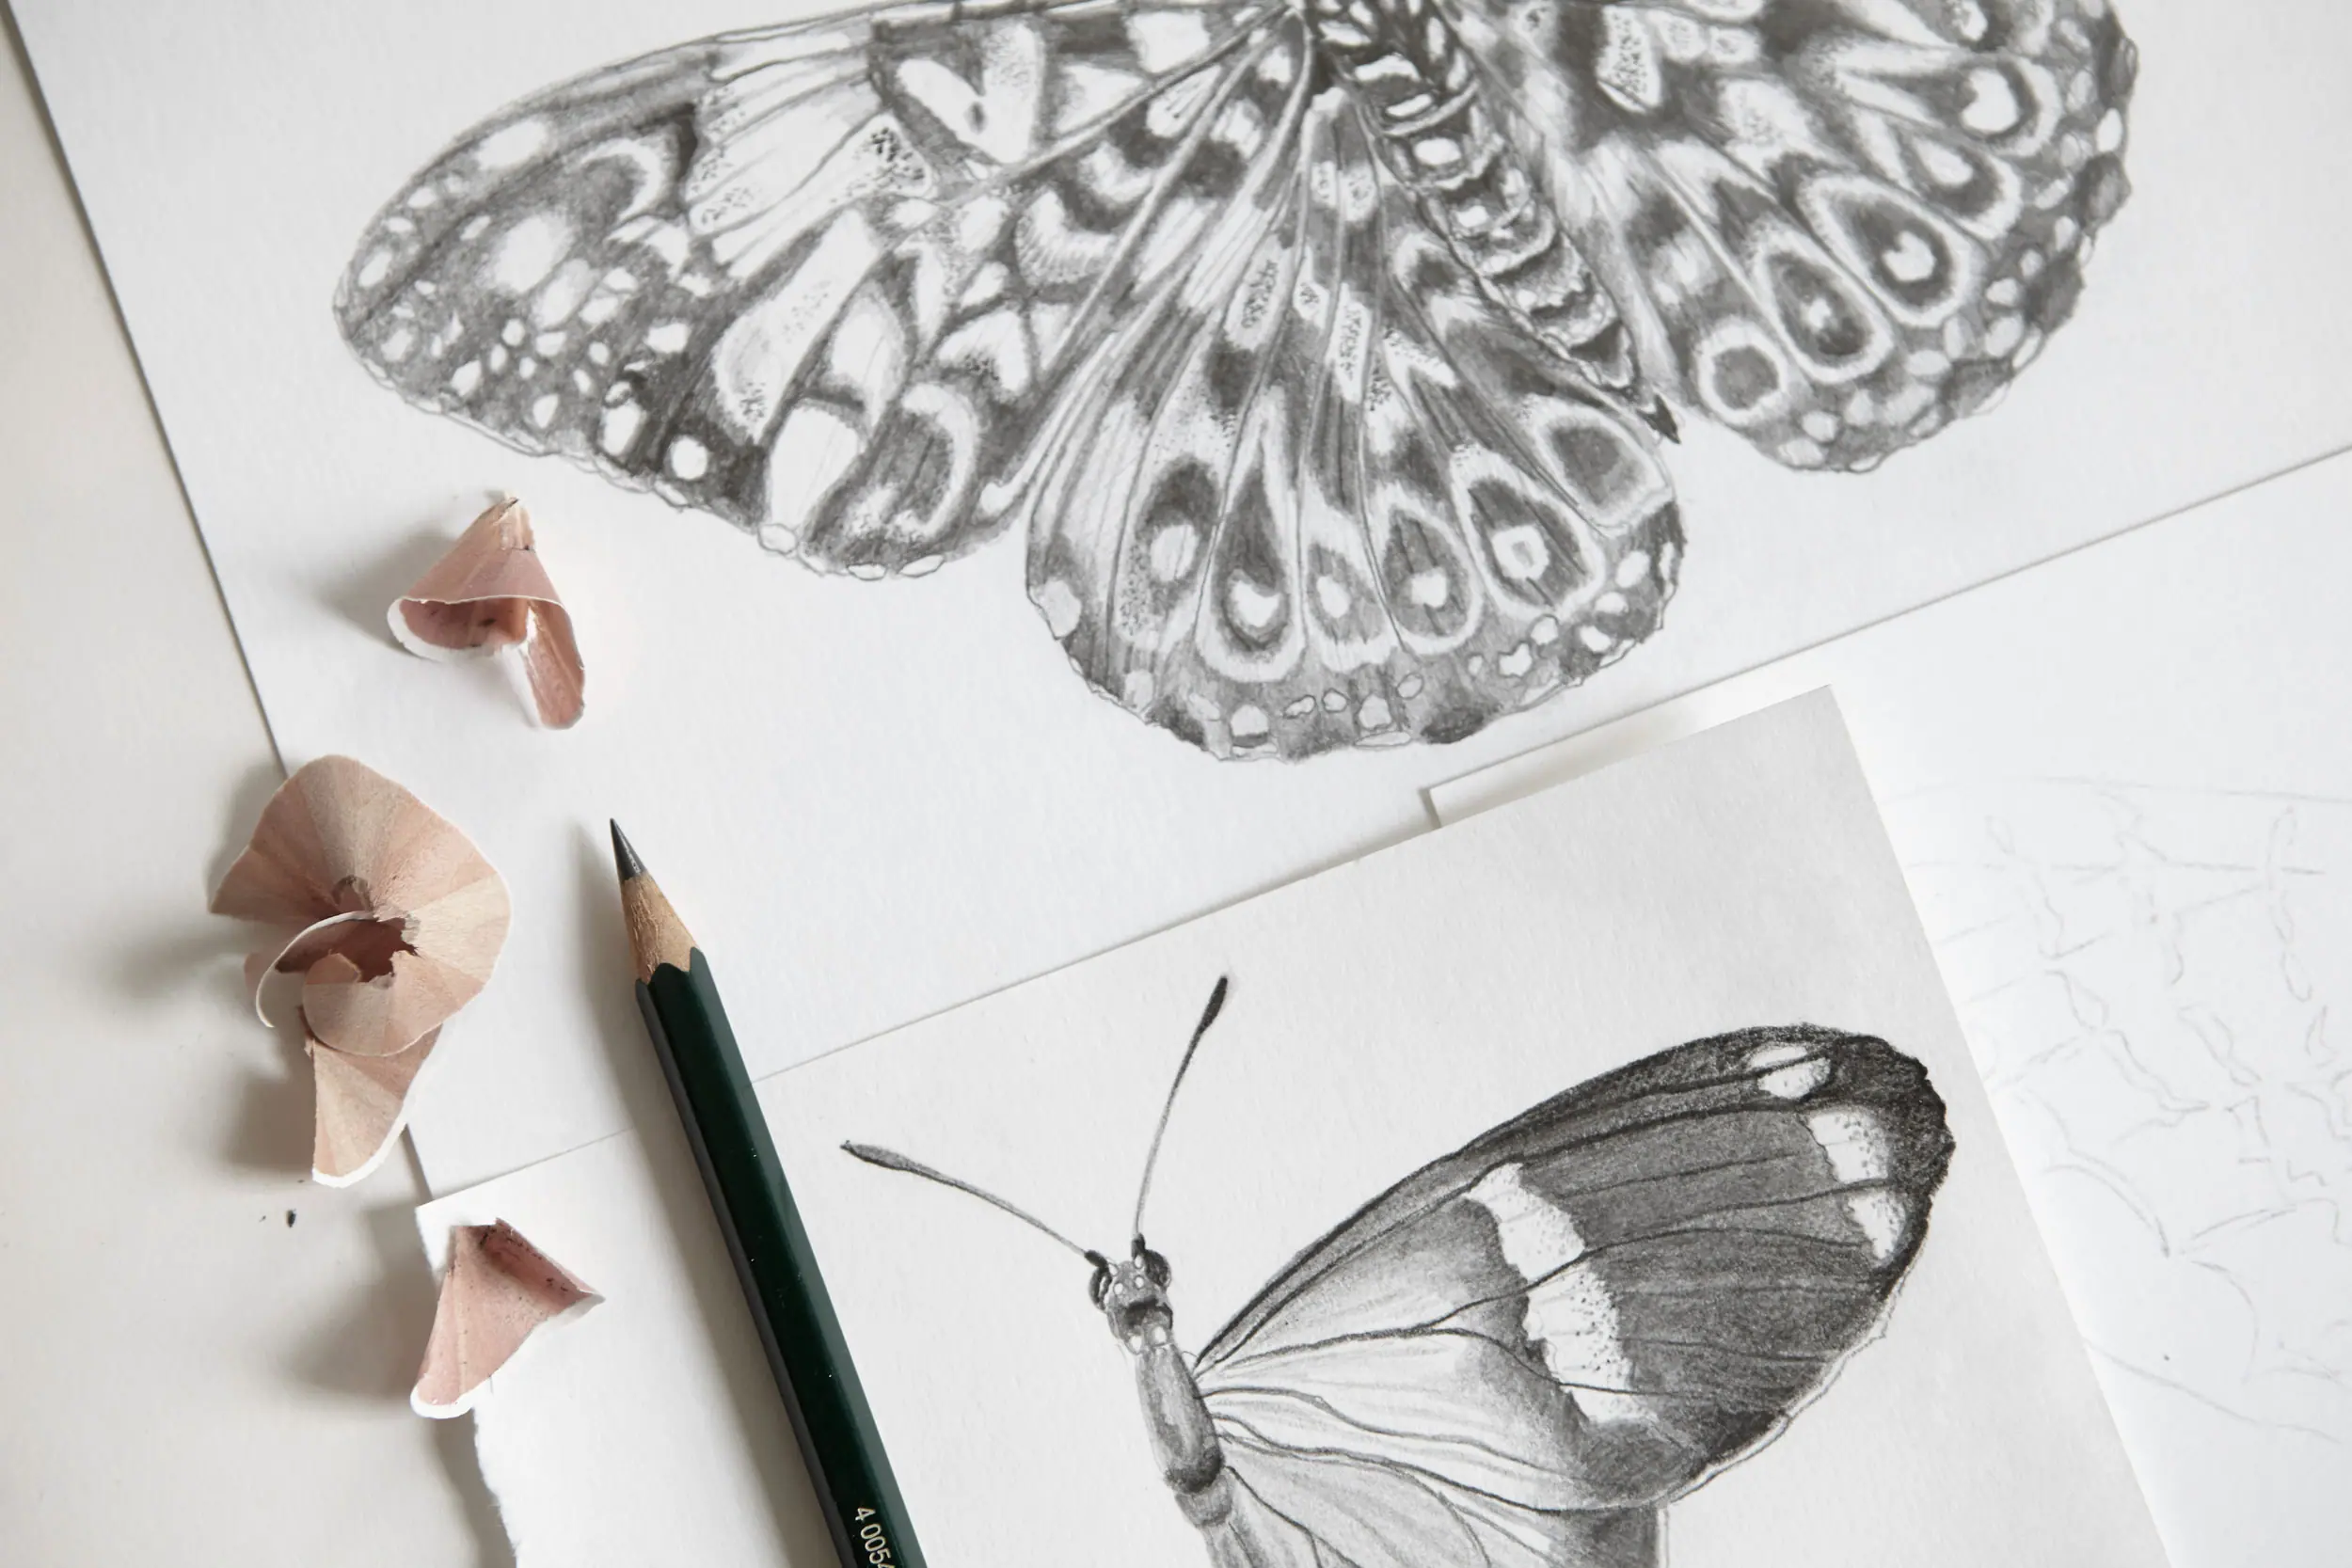 40 Beautiful Simple Butterfly Drawings In Pencil - Hobby Lesson-saigonsouth.com.vn